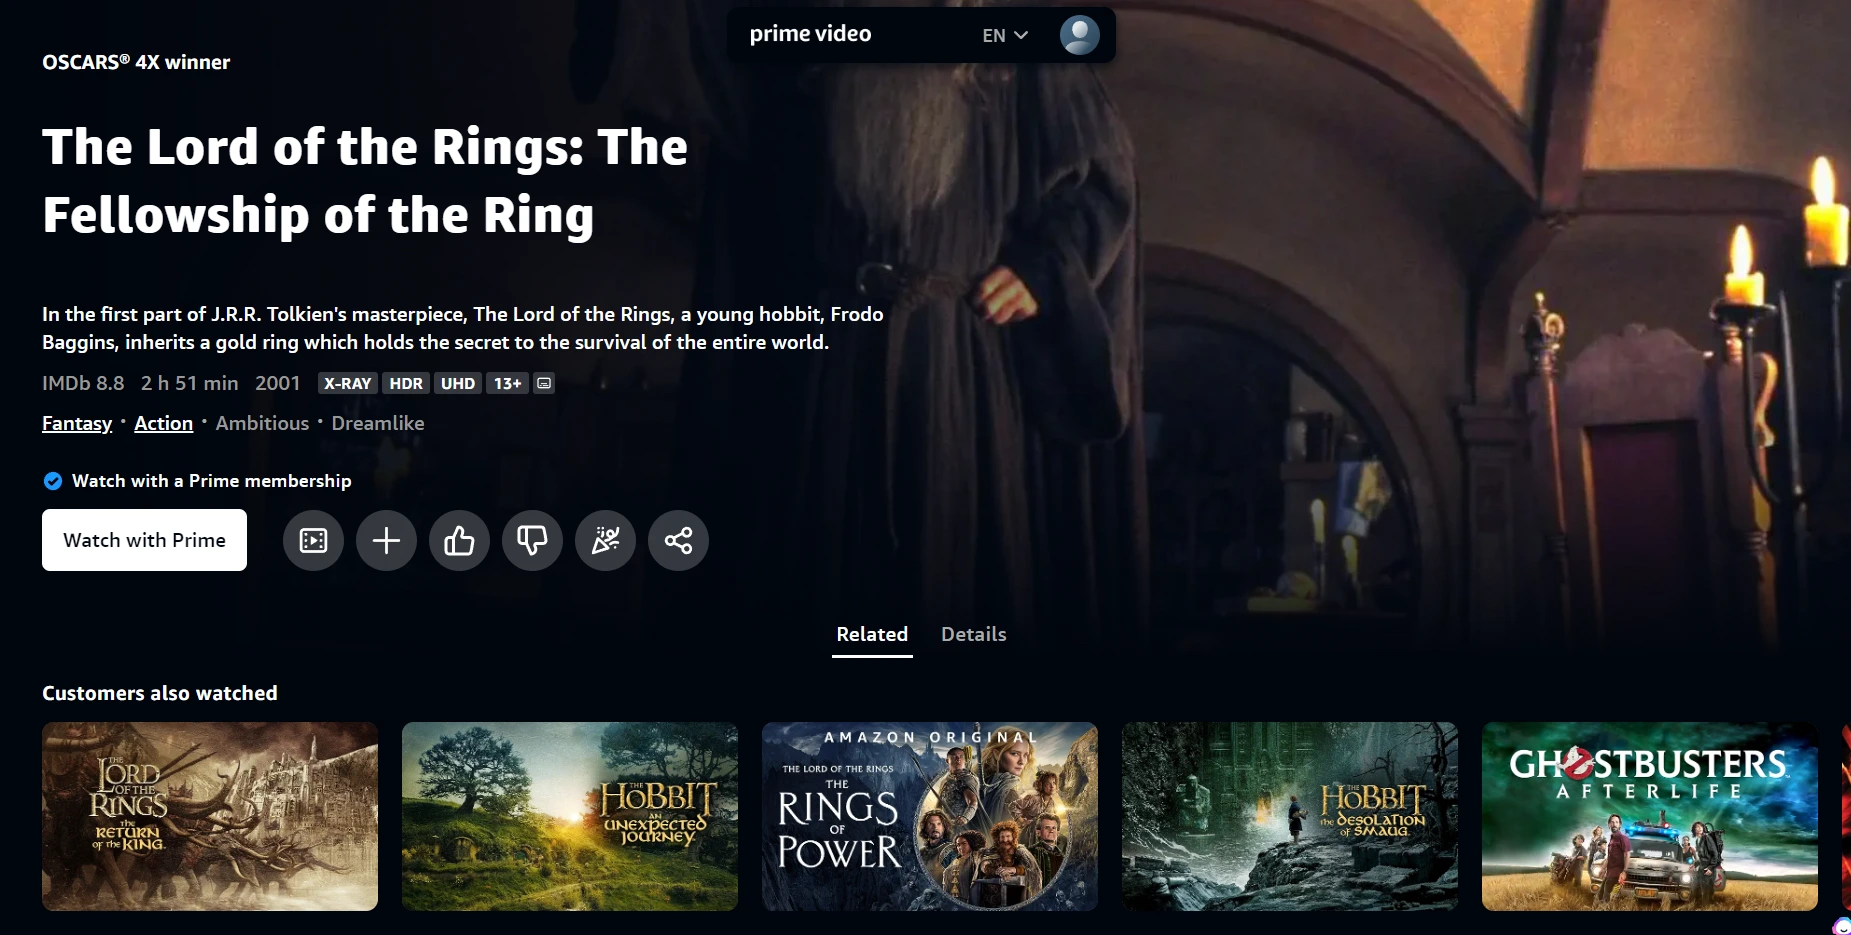 How to Watch 'The Lord of the Rings: Rings of Power' Online for Free